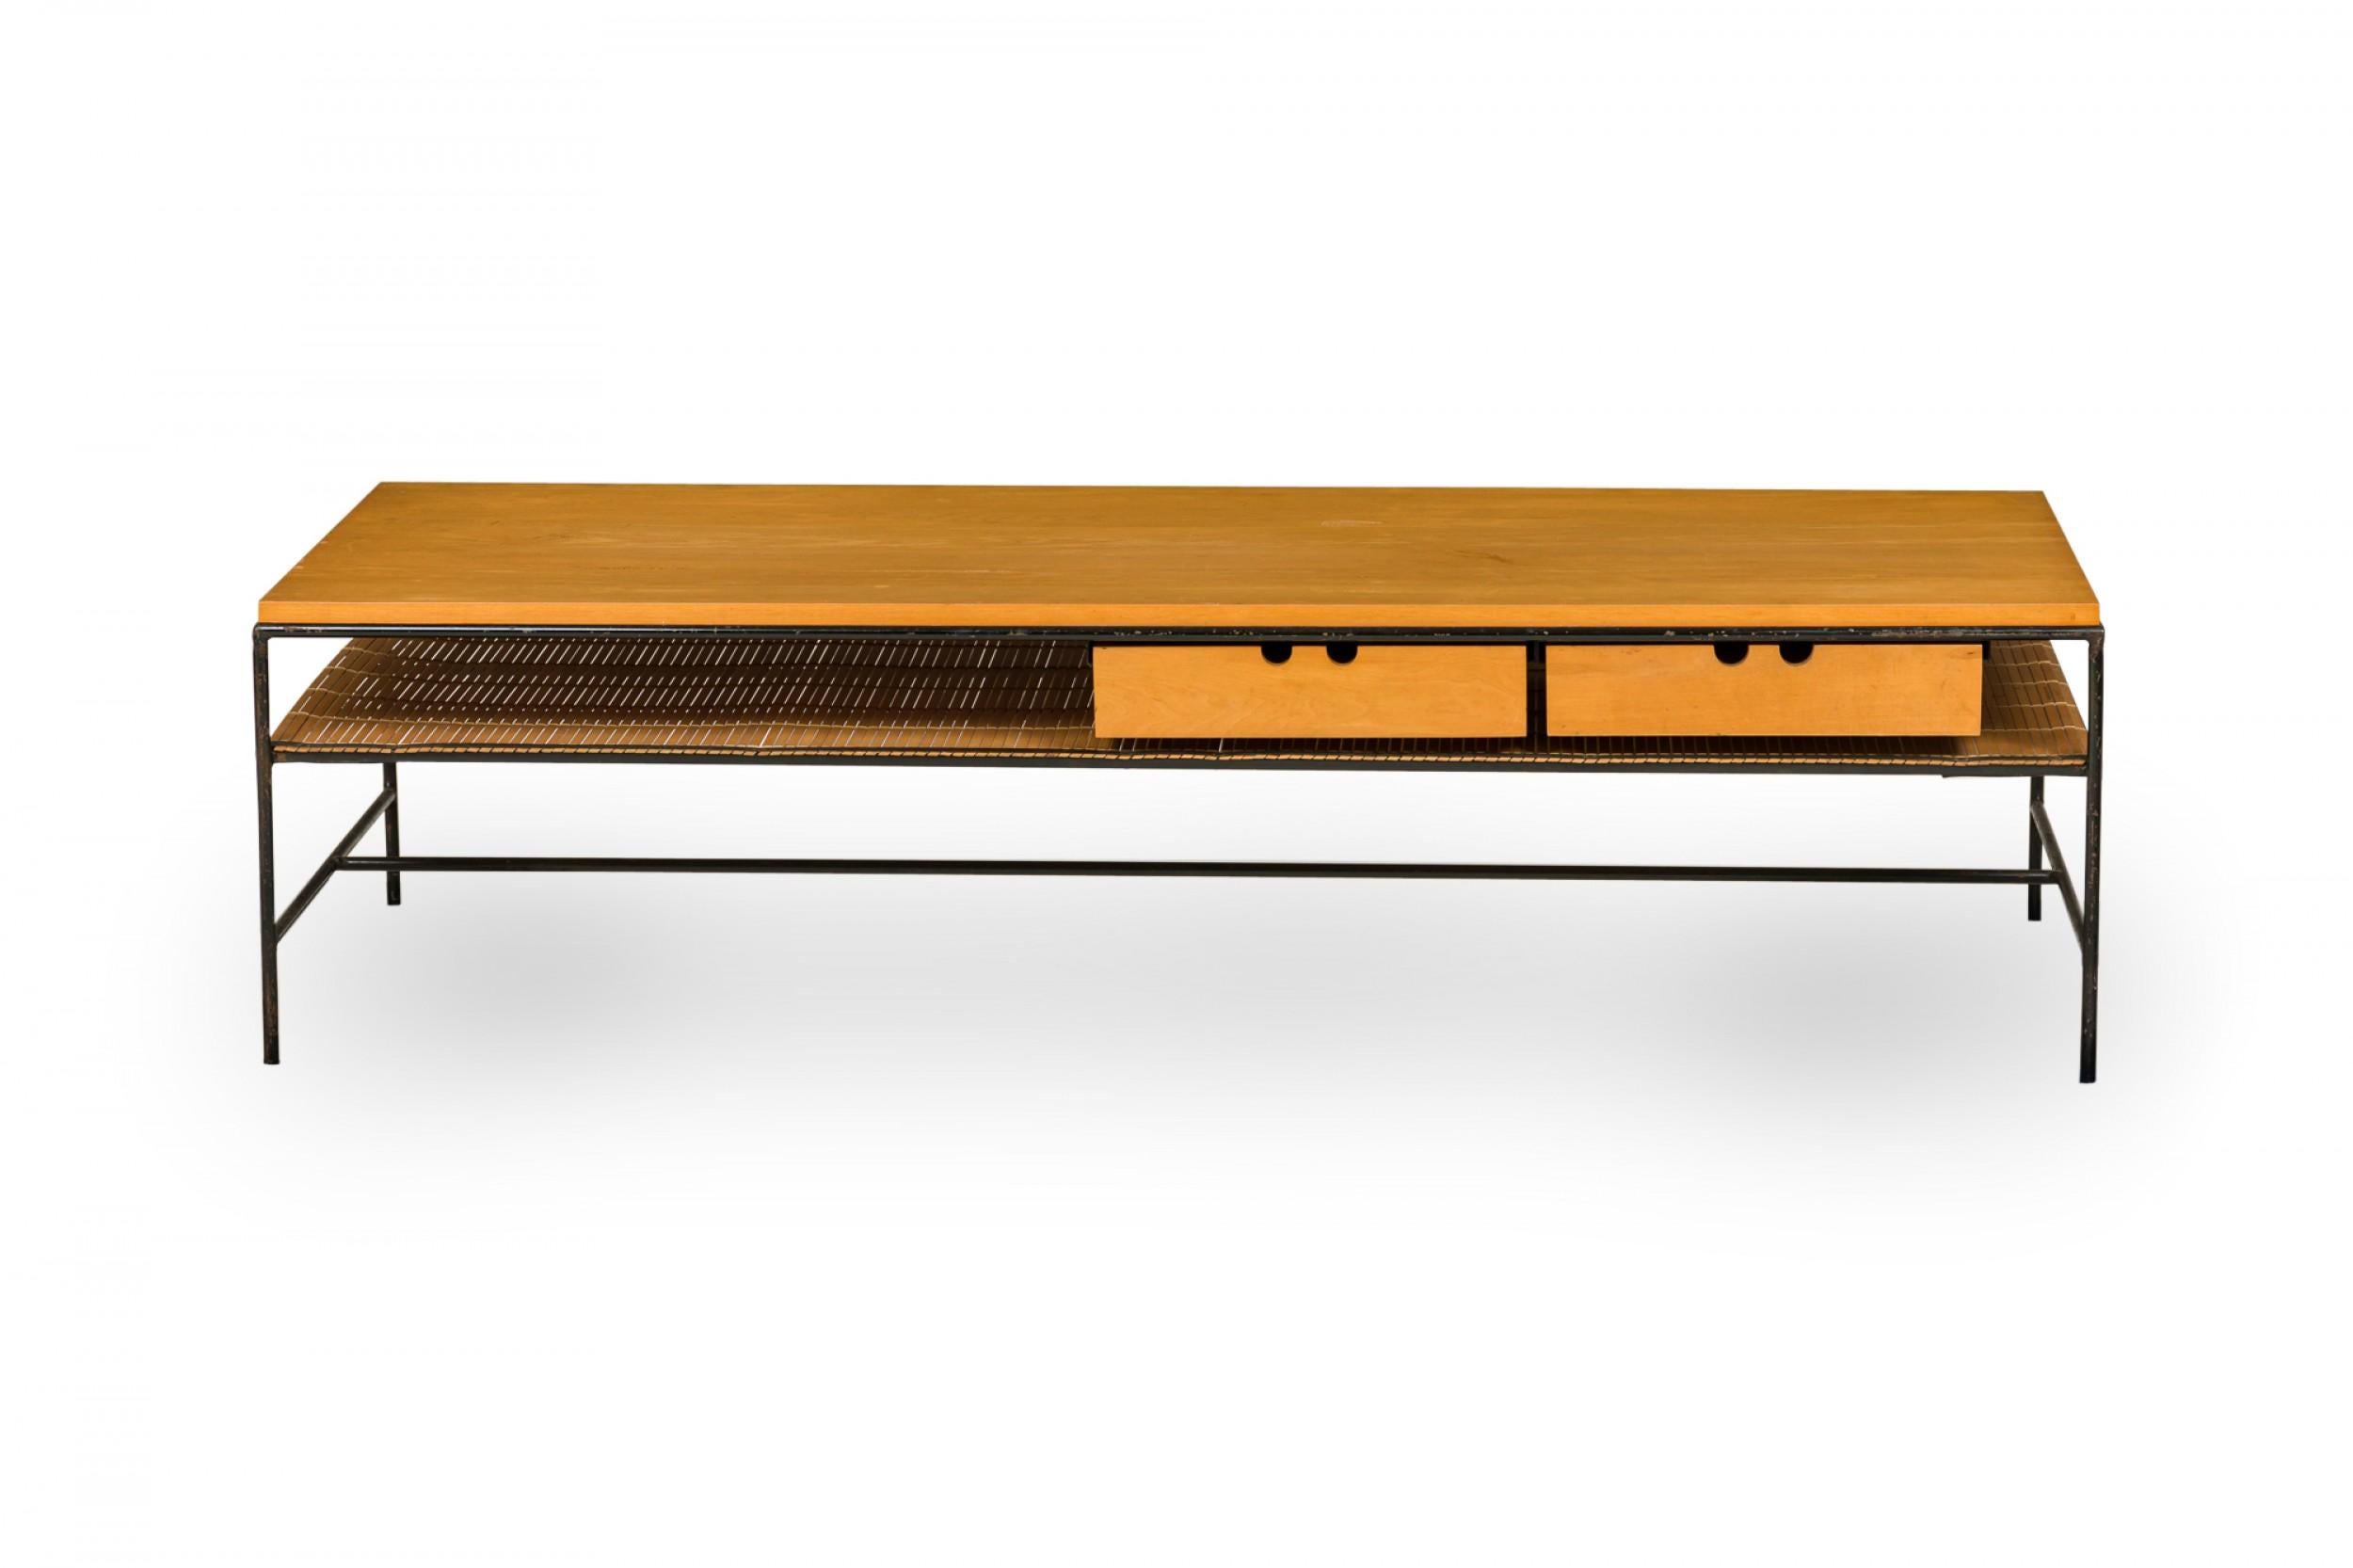 American Mid-Century 'Planner' coffee / cocktail table with a rectangular blond wood top with two drawers and a shallow shelf below, supported by a black iron frame with a stretcher base. (PAUL MCCOBB FOR WINCHENDON FURNITURE COMPANY)(Similar table: